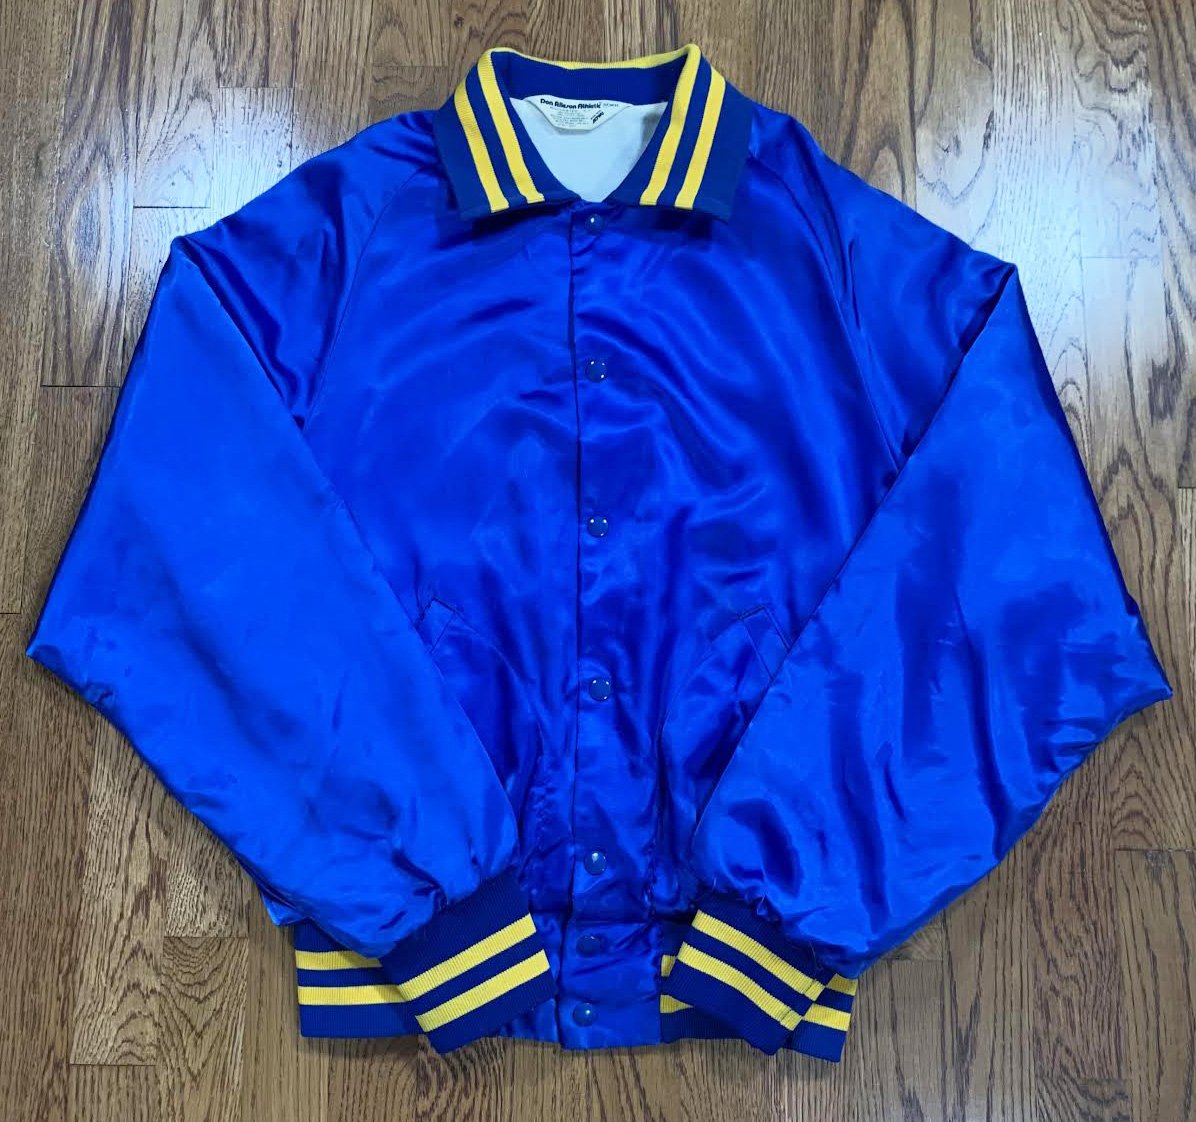 Mens Royal Blue Baseball Jacket with Yellow Sleeves (Almost Gone)